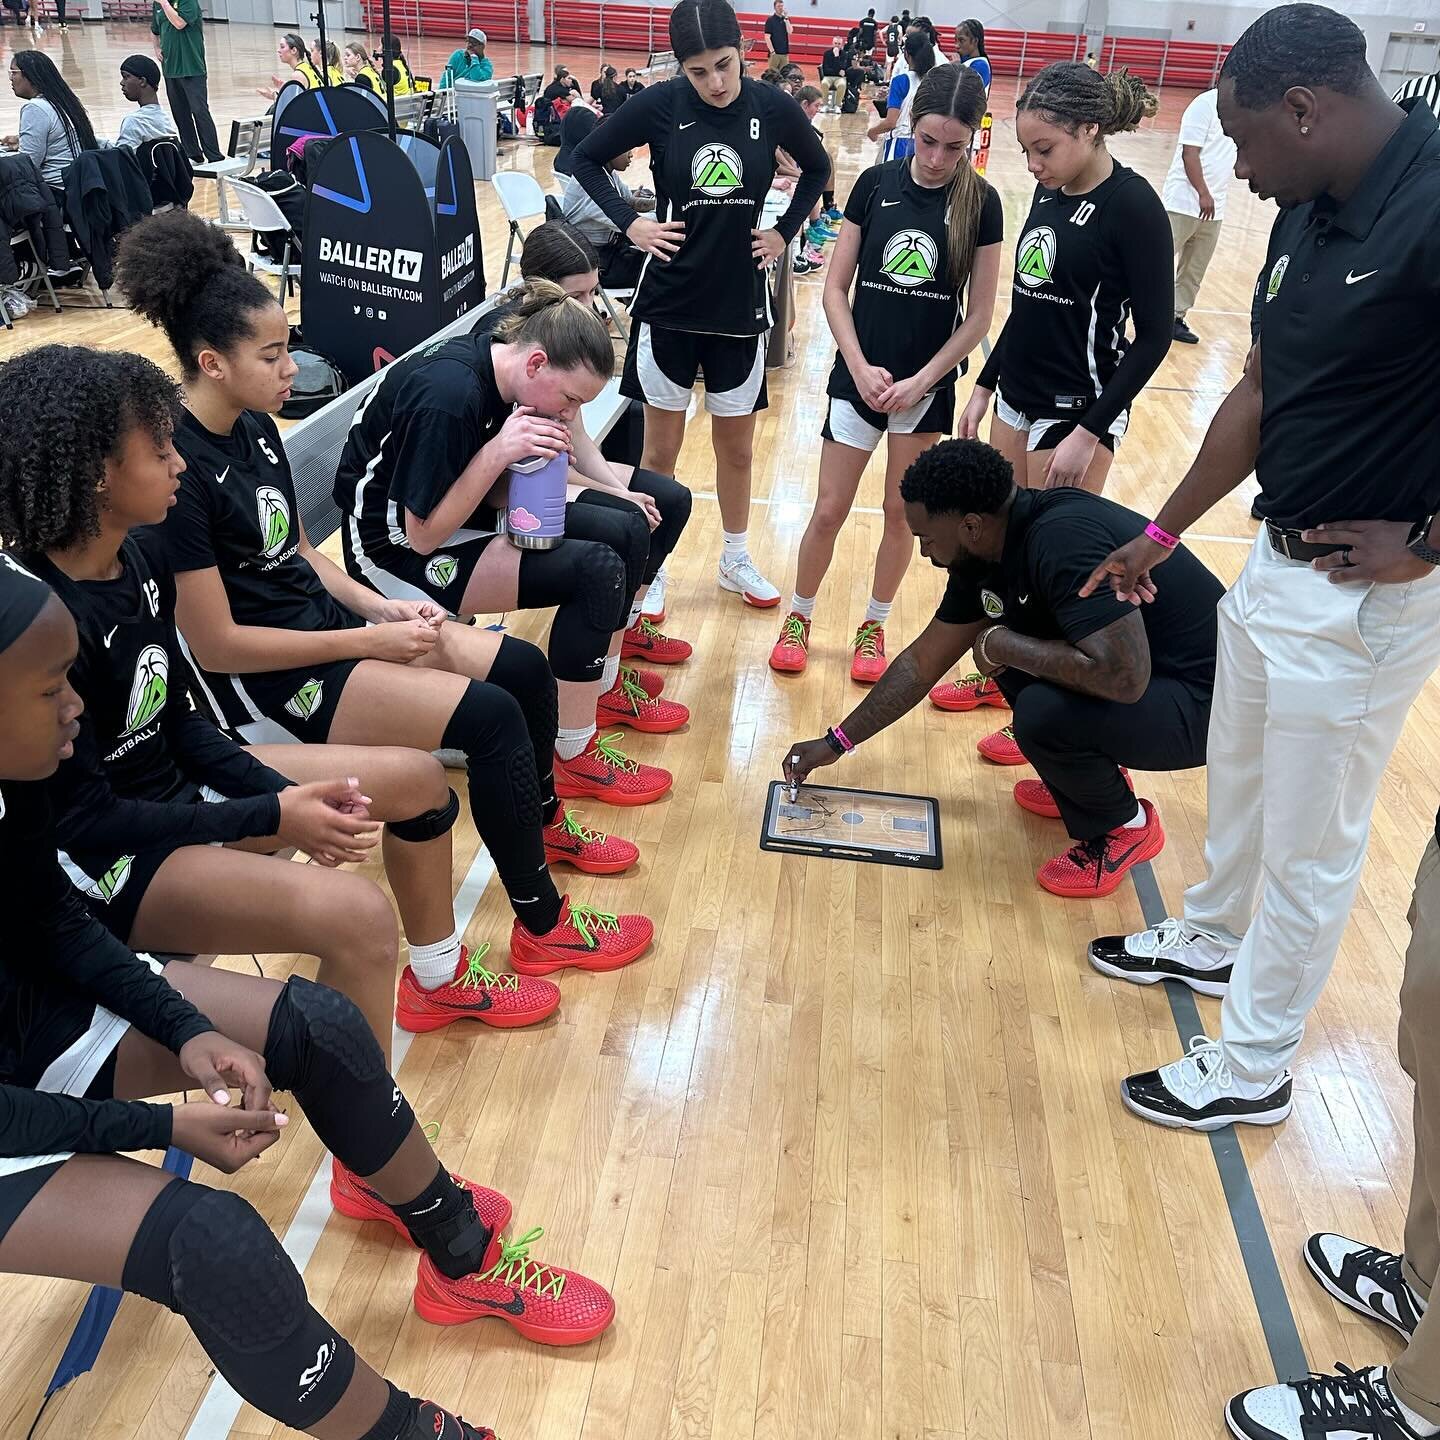 Day 1 recap (Jr EYBL): 14u girls went 1-1 on the day, lost a close one by 3 but overall great day! Let&rsquo;s finish the weekend off strong! Thank you for this amazing opportunity @nikegirlseybl 

#trusttheprocess #nikegirls #eybl #chicago #justdoit